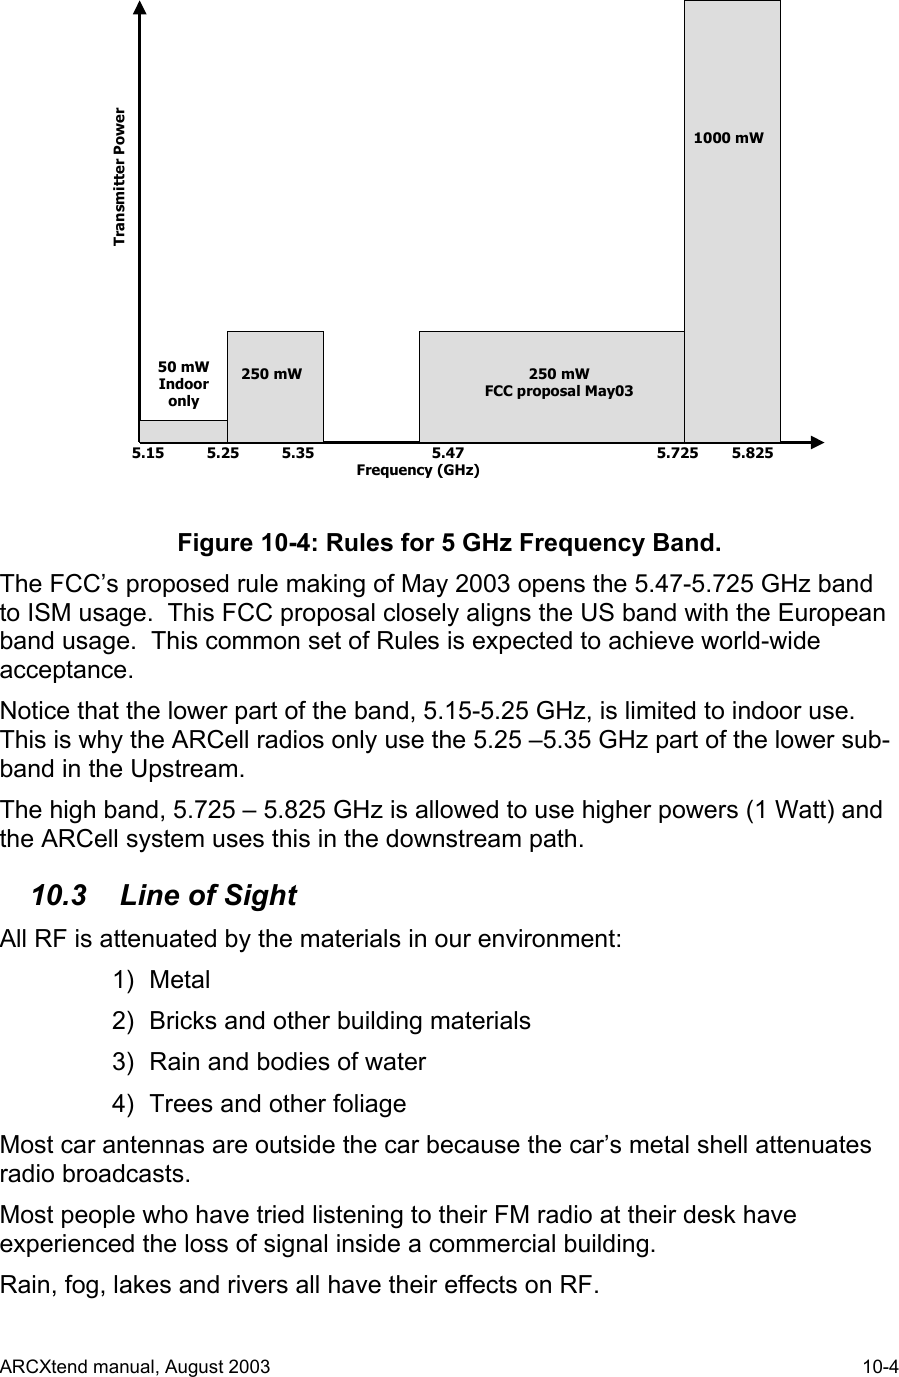  50 mWIndooronly5.15 5.25 5.35 5.47 5.725 5.825Frequency (GHz)250 mW 250 mWFCC proposal May031000 mWTransmitter Power Figure 10-4: Rules for 5 GHz Frequency Band. The FCC’s proposed rule making of May 2003 opens the 5.47-5.725 GHz band to ISM usage.  This FCC proposal closely aligns the US band with the European band usage.  This common set of Rules is expected to achieve world-wide acceptance. Notice that the lower part of the band, 5.15-5.25 GHz, is limited to indoor use.  This is why the ARCell radios only use the 5.25 –5.35 GHz part of the lower sub-band in the Upstream. The high band, 5.725 – 5.825 GHz is allowed to use higher powers (1 Watt) and the ARCell system uses this in the downstream path. 10.3  Line of Sight All RF is attenuated by the materials in our environment:  1) Metal 2)  Bricks and other building materials 3)  Rain and bodies of water 4)  Trees and other foliage Most car antennas are outside the car because the car’s metal shell attenuates radio broadcasts.   Most people who have tried listening to their FM radio at their desk have experienced the loss of signal inside a commercial building. Rain, fog, lakes and rivers all have their effects on RF. ARCXtend manual, August 2003    10-4 